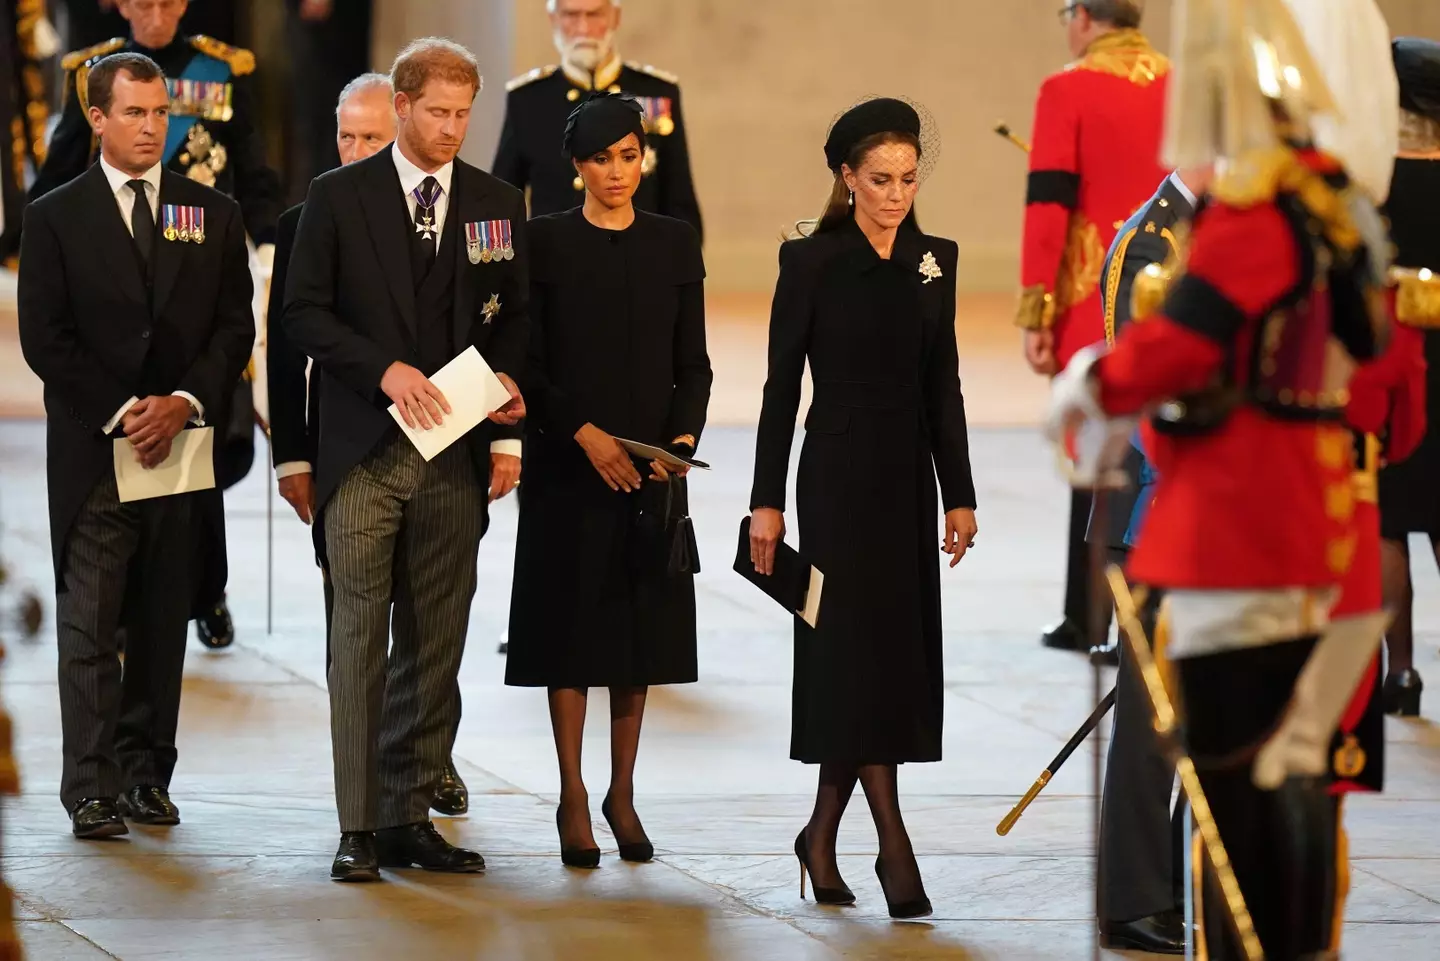 For the first time in a while, Harry and Meghan were seen with William and Kate.